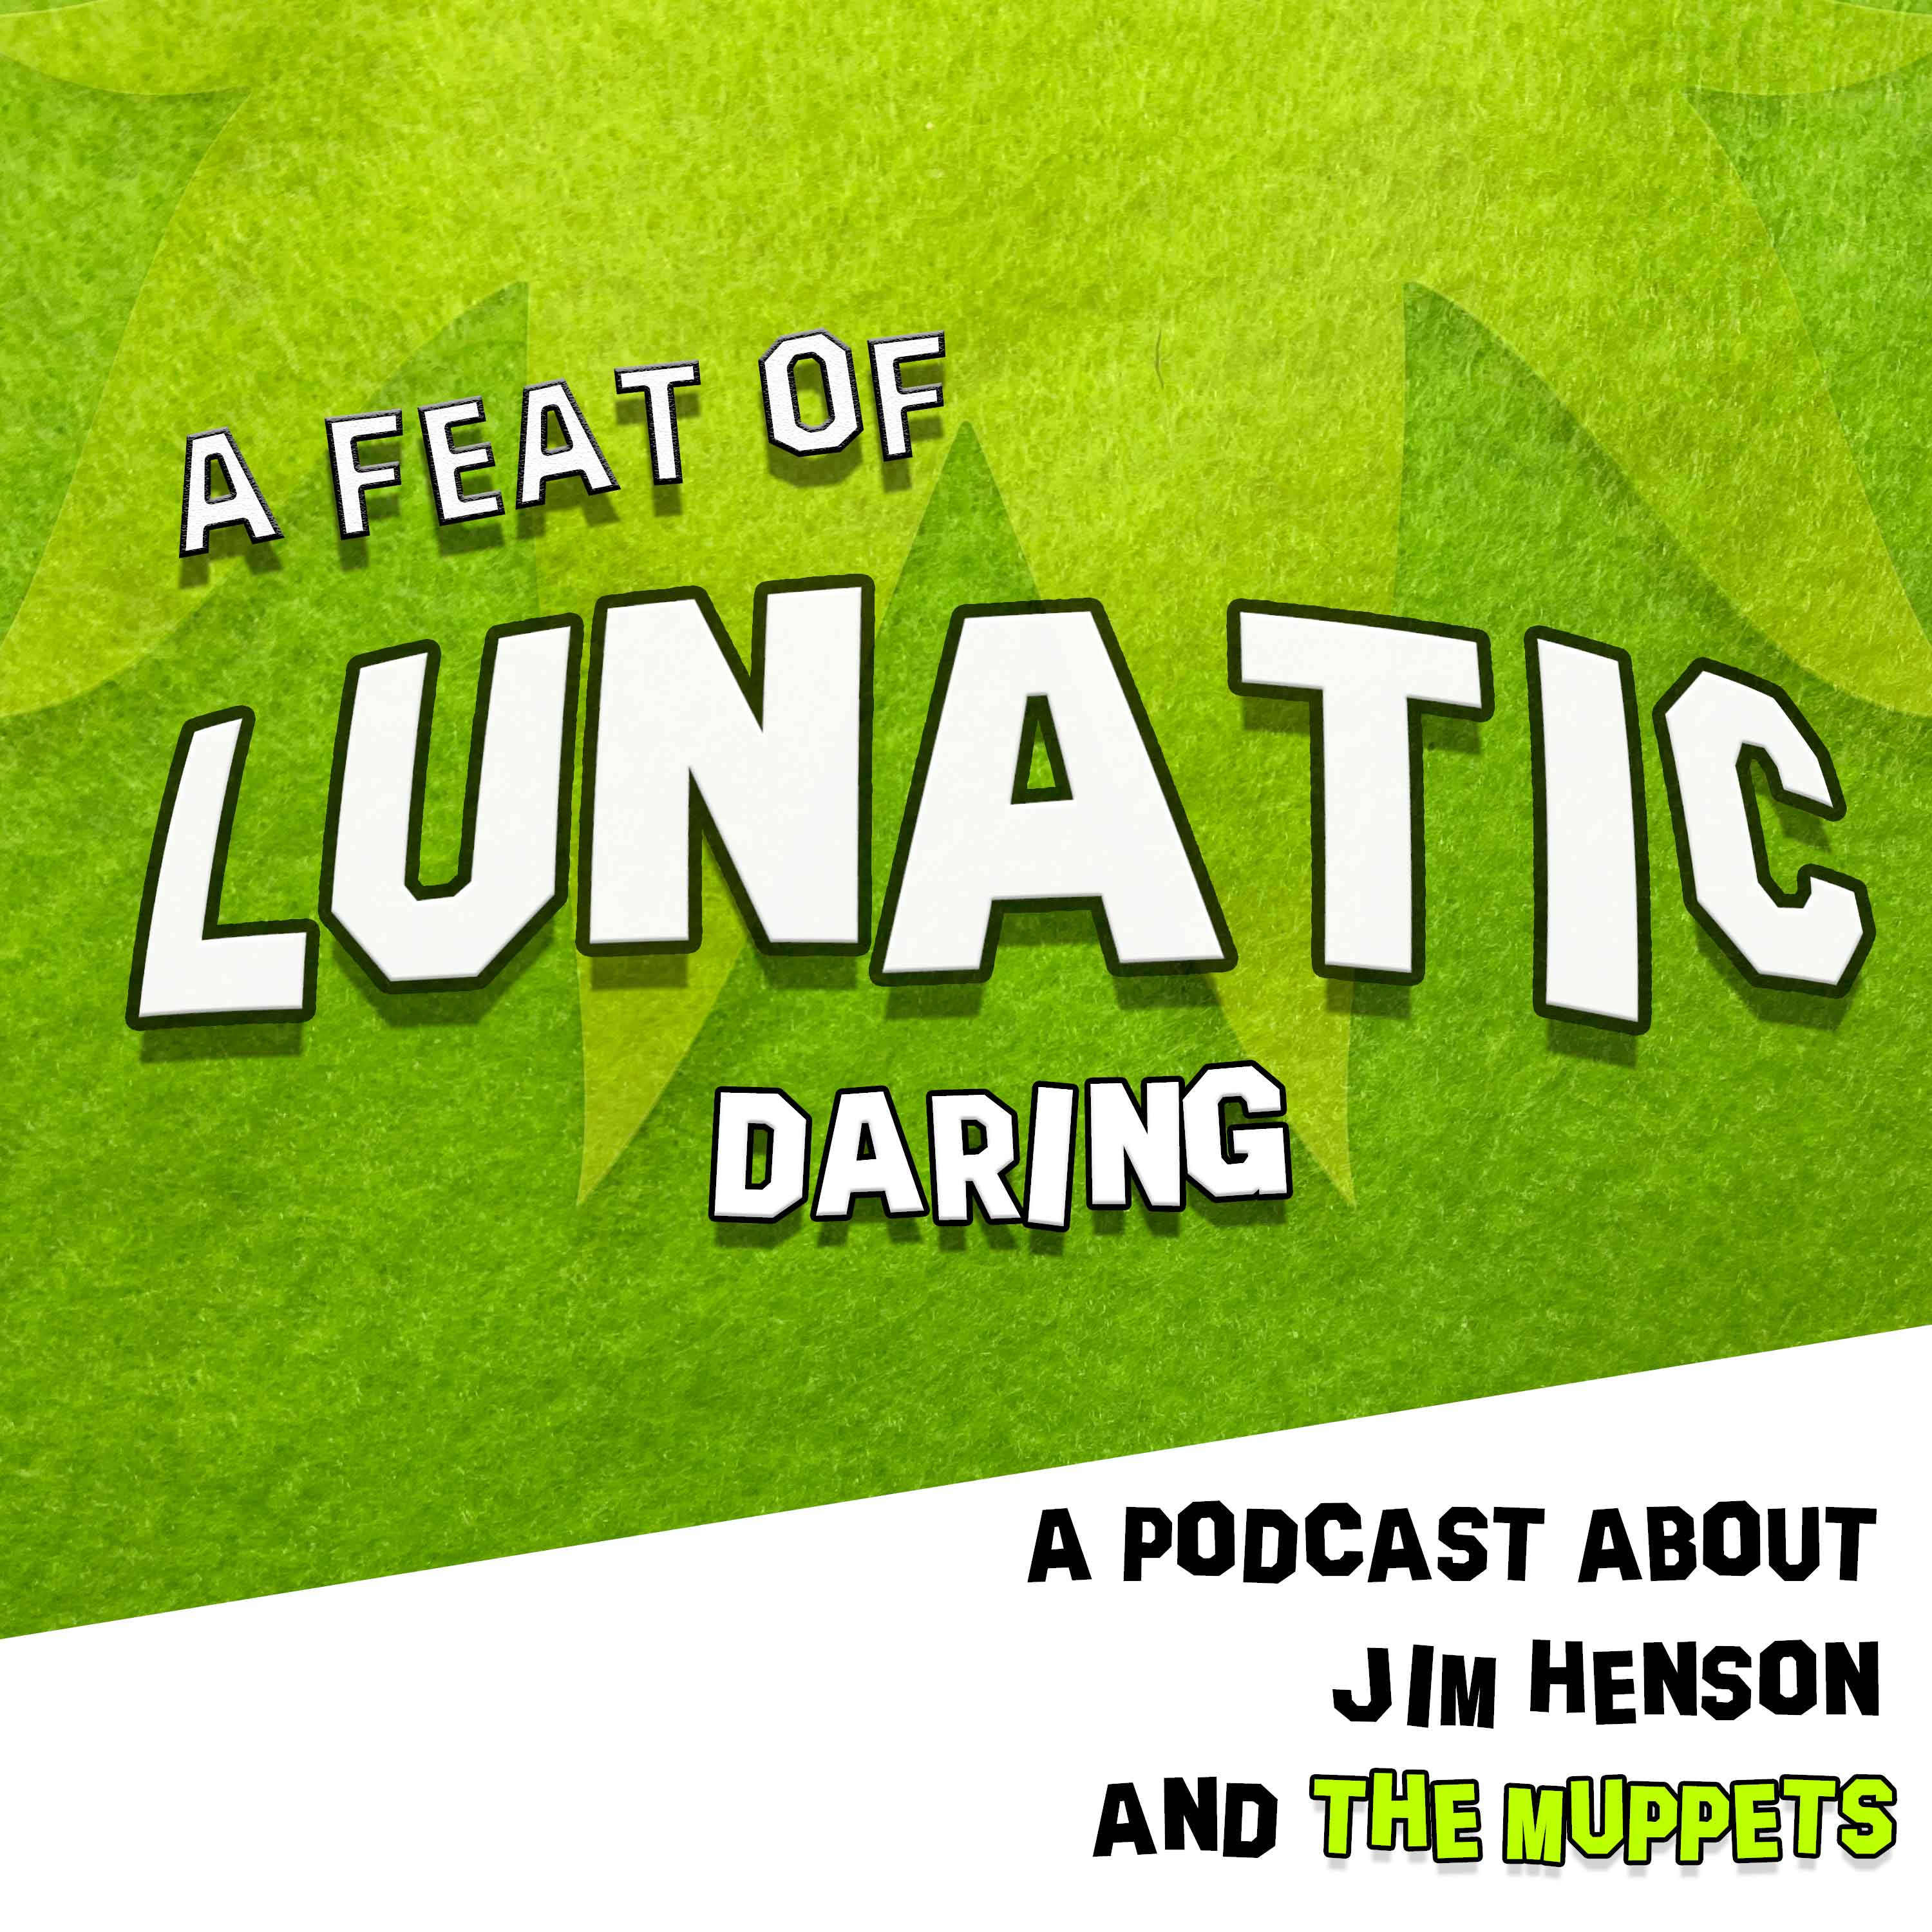 Artwork for A Feat of Lunatic Daring - a podcast about Jim Henson & The Muppets